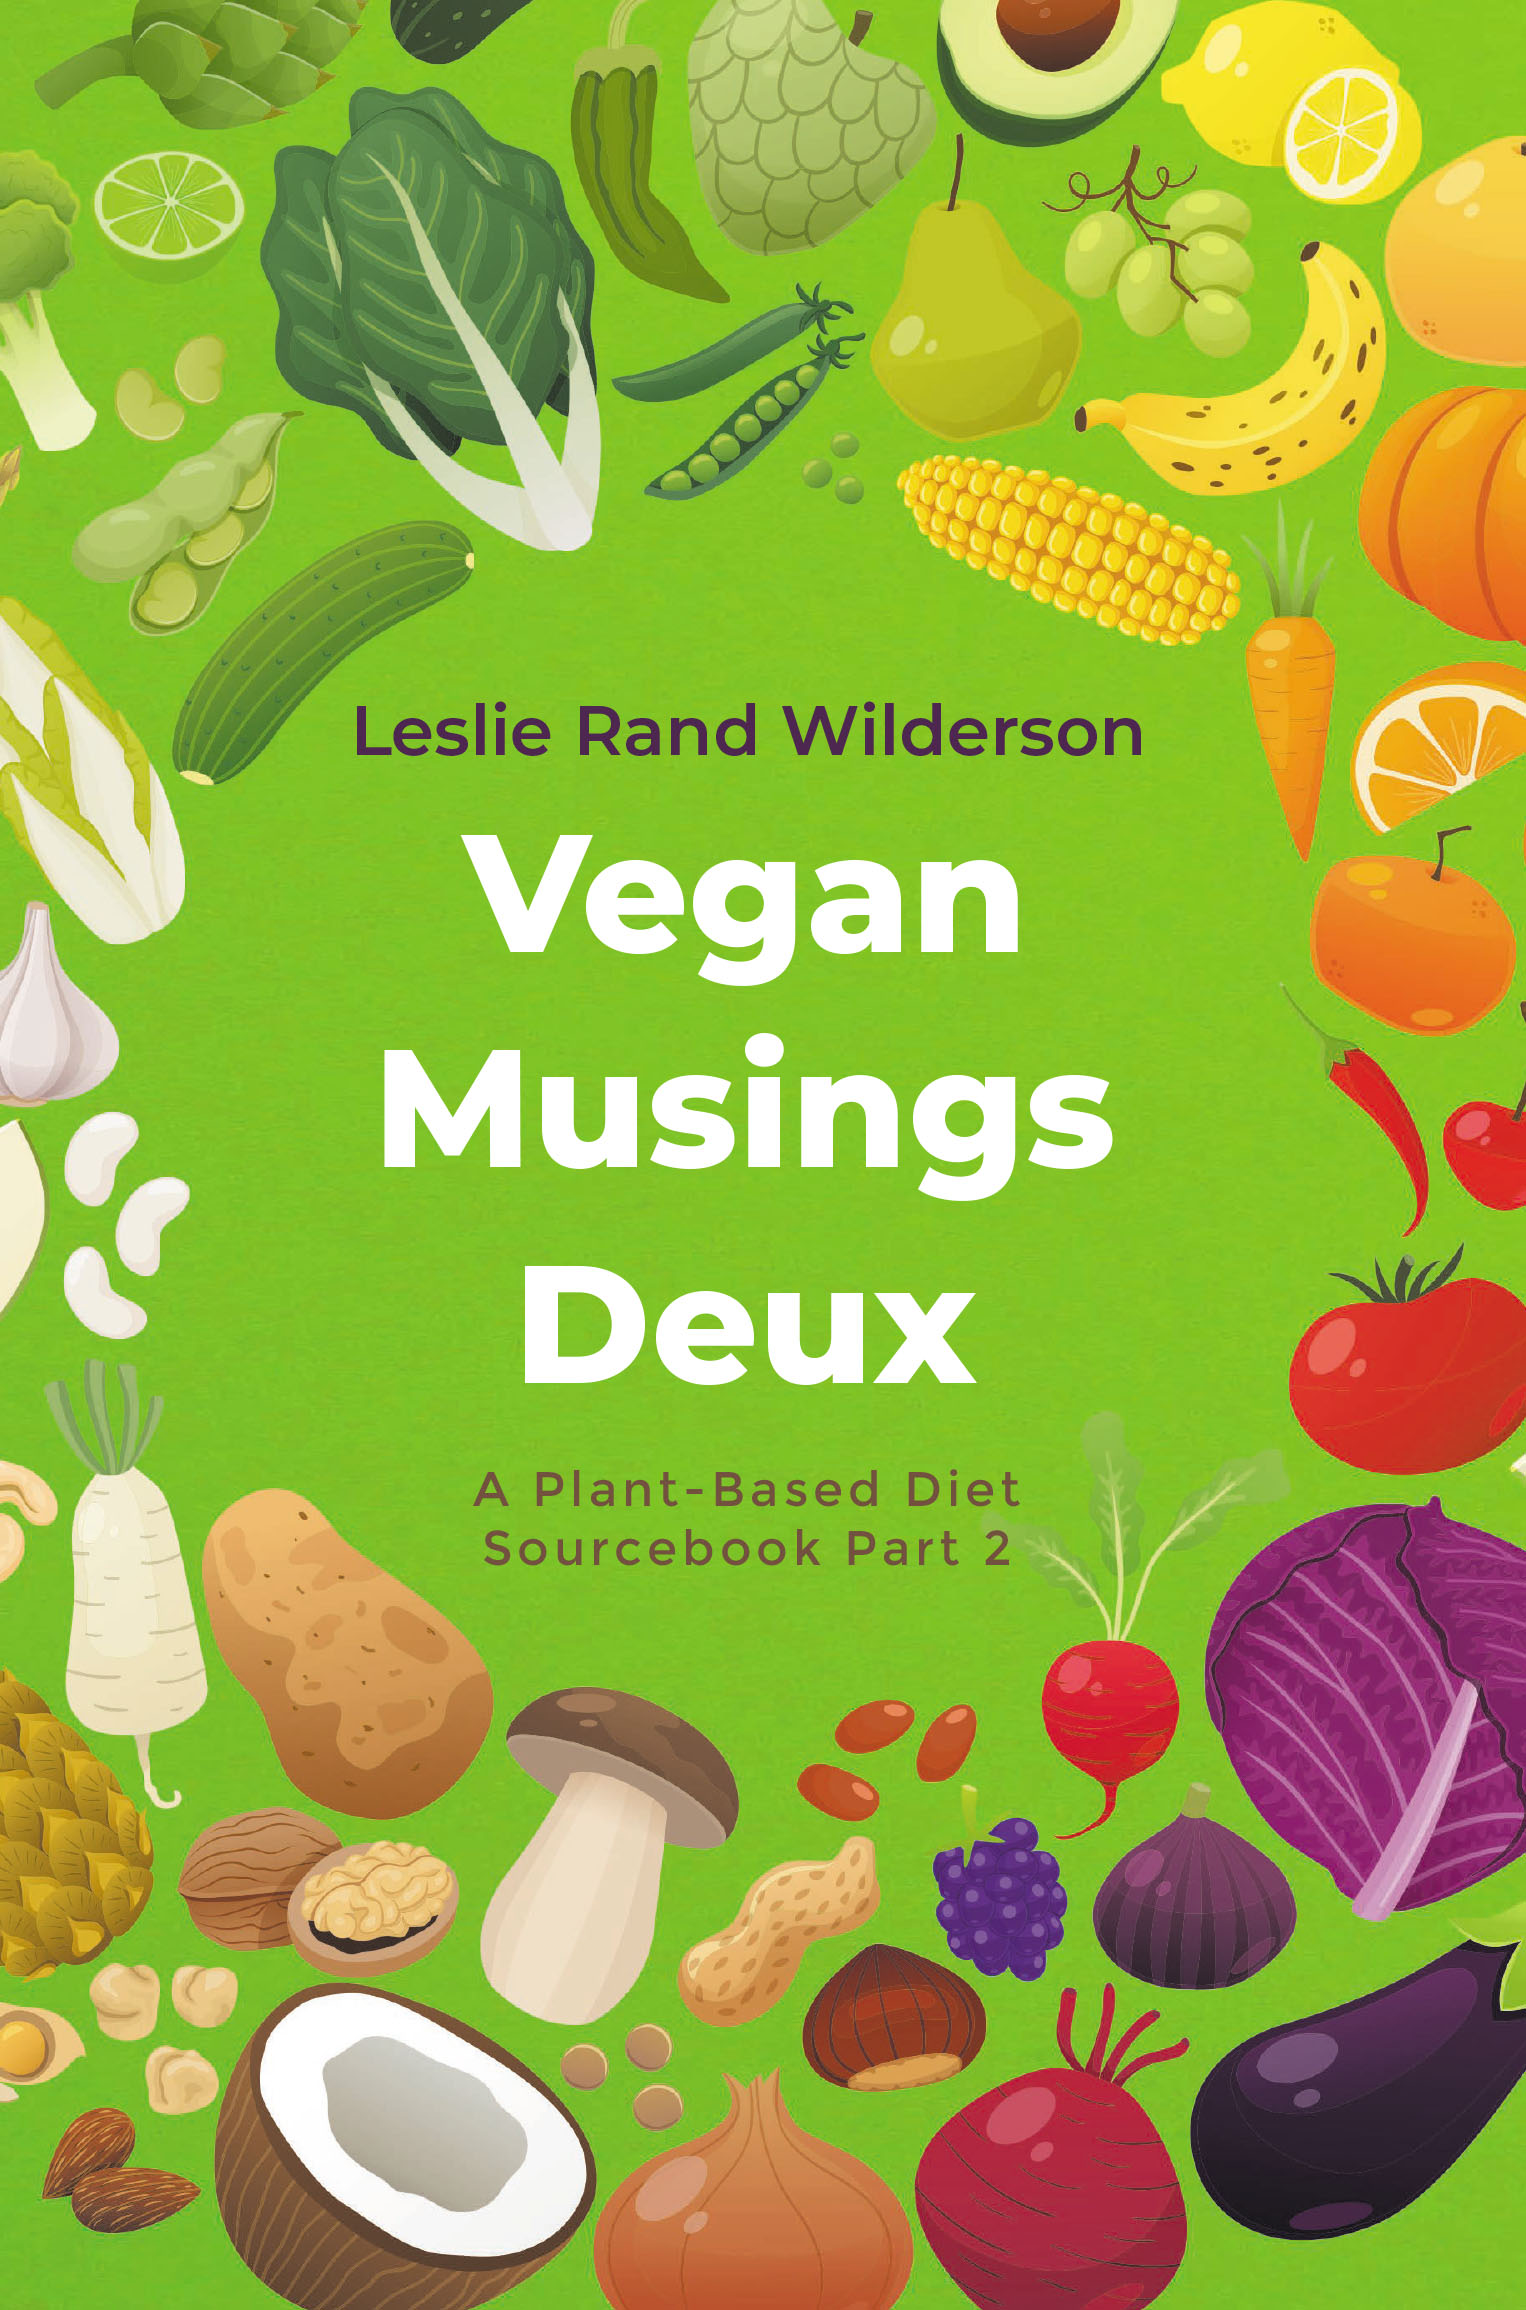 Leslie Rand Wilderson’s New Book, "Vegan Musings Deux," Provides Fundamentals and Scientific Data to Give a New Dimension to the Wondrous World of Plant-Based Nutrition